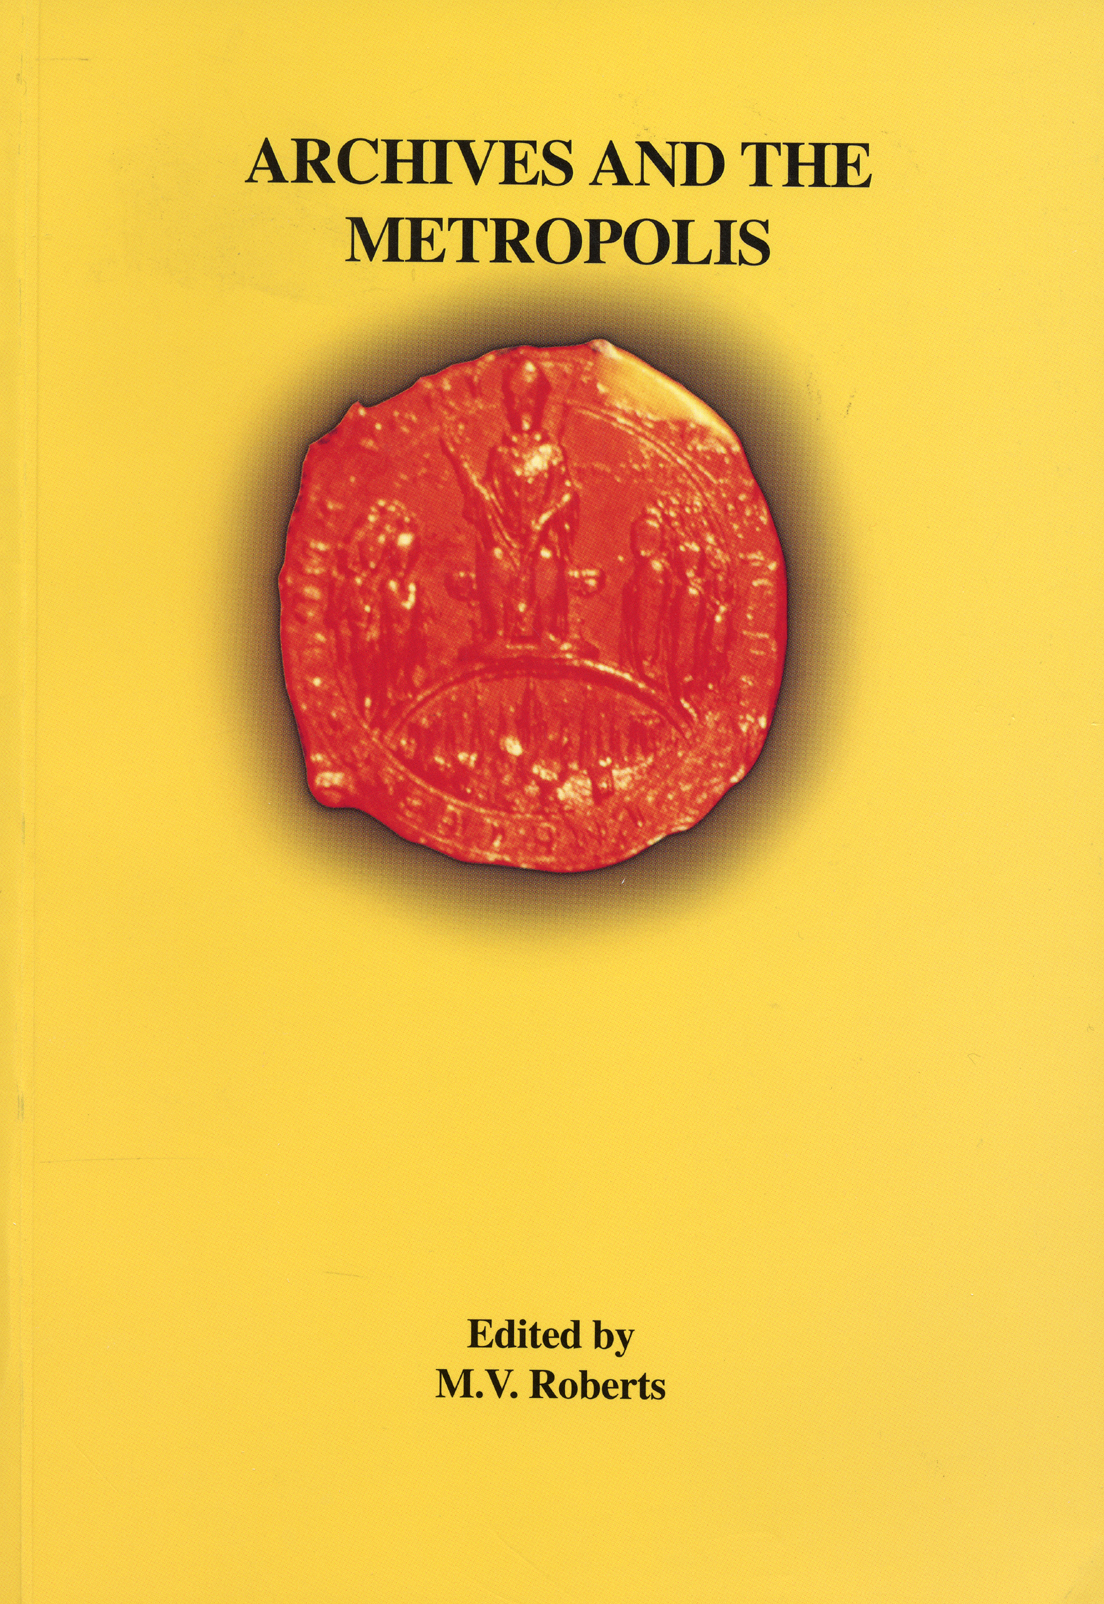 book cover-Archives and the metropolis